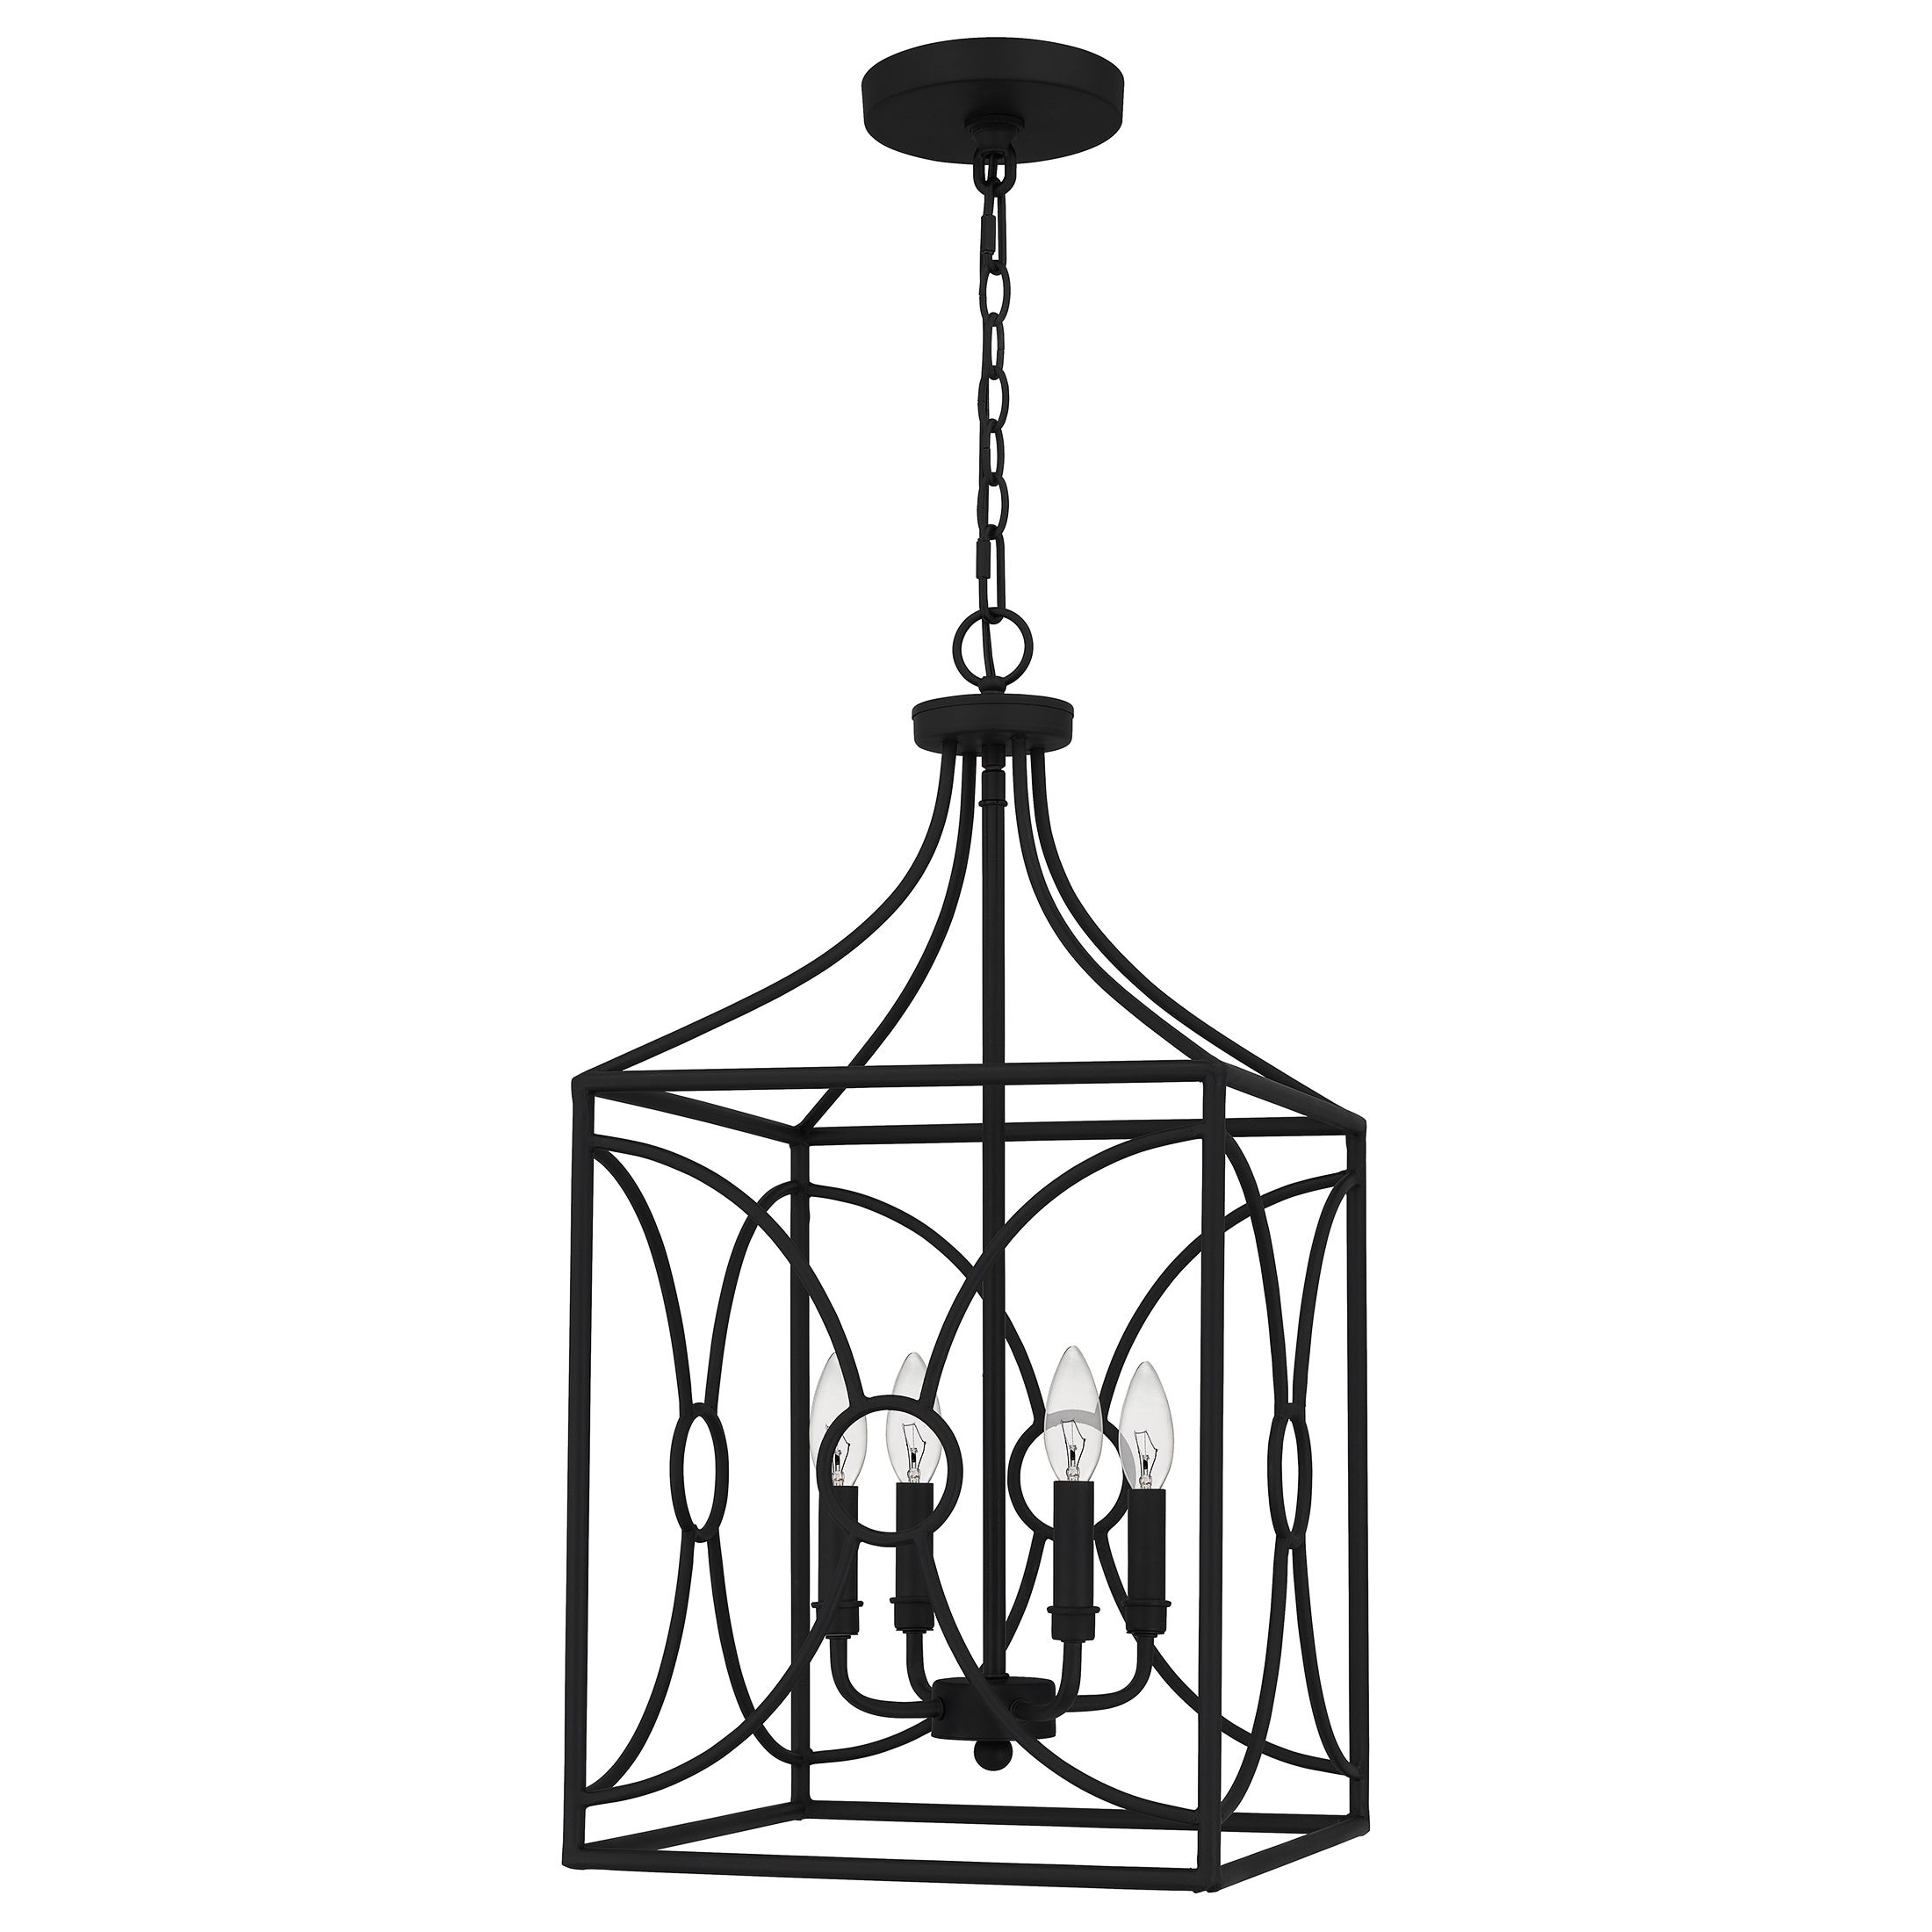 Quoizel Grenelle 4 Light Matte Black Traditional Lantern Pendant Light In  The Pendant Lighting Department At Lowes With Regard To Black With White Lantern Chandeliers (View 9 of 15)